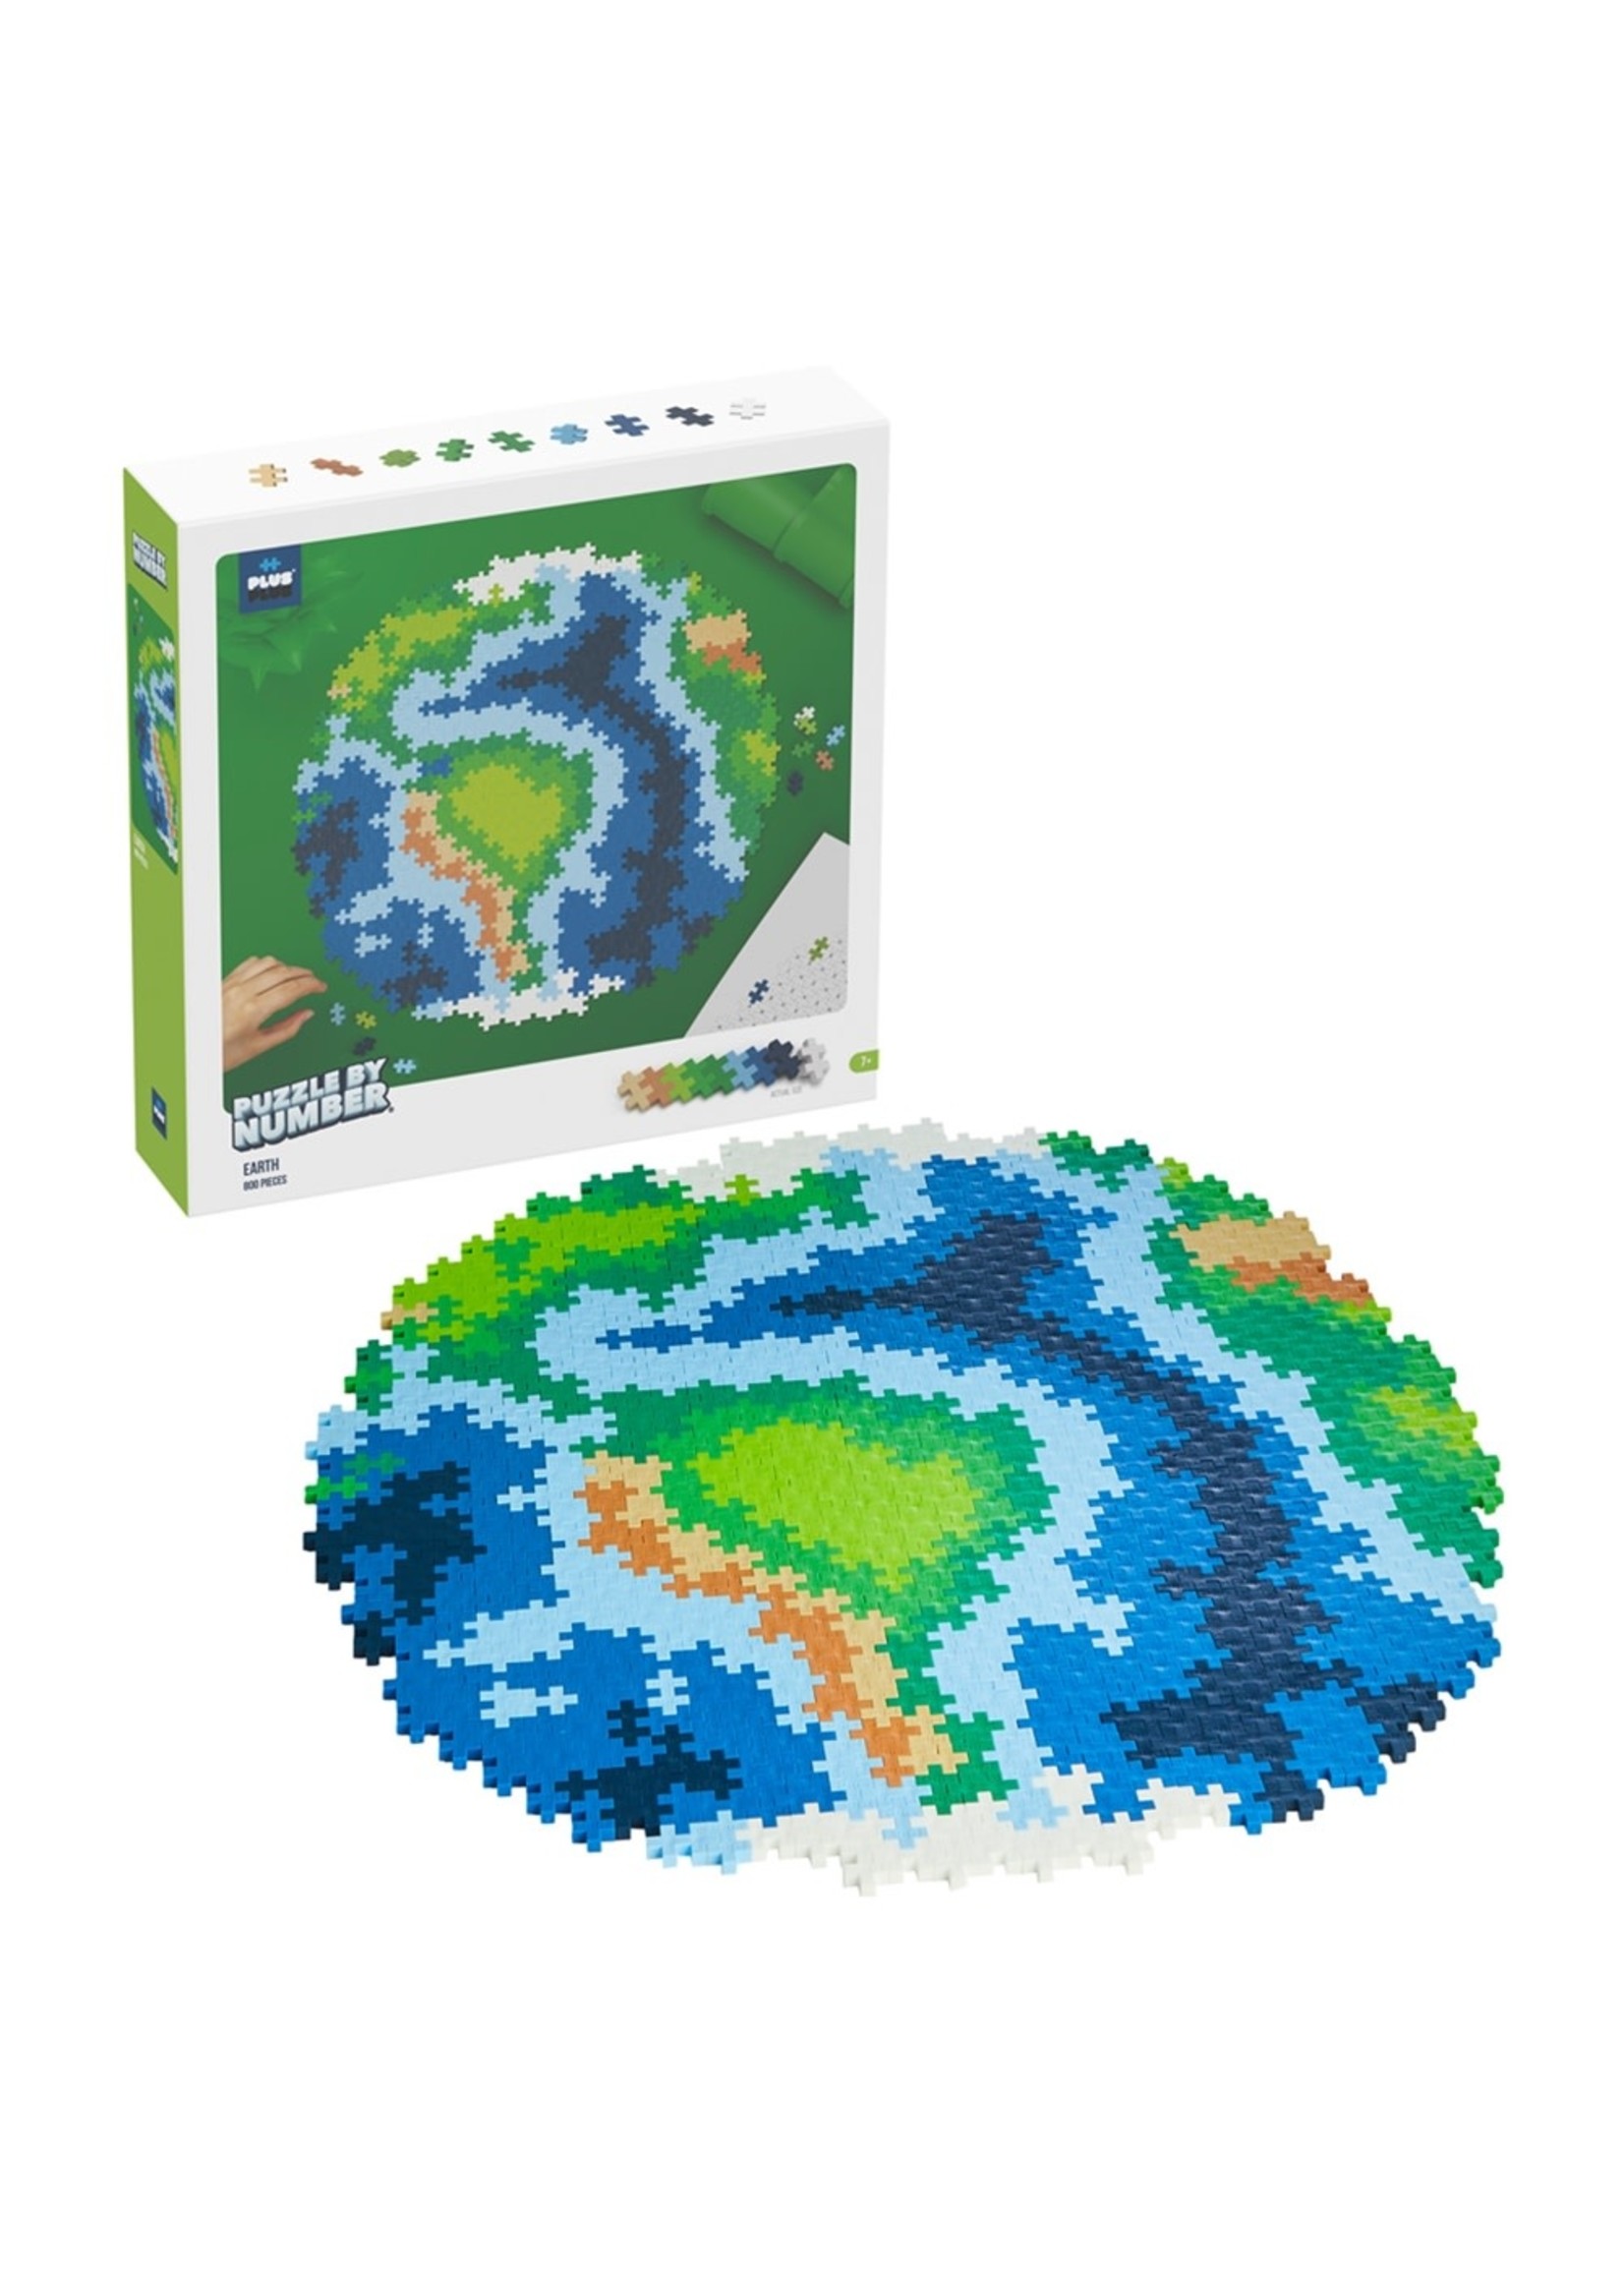 Plus Plus Puzzle by Numbers Earth 800p - Plus Plus